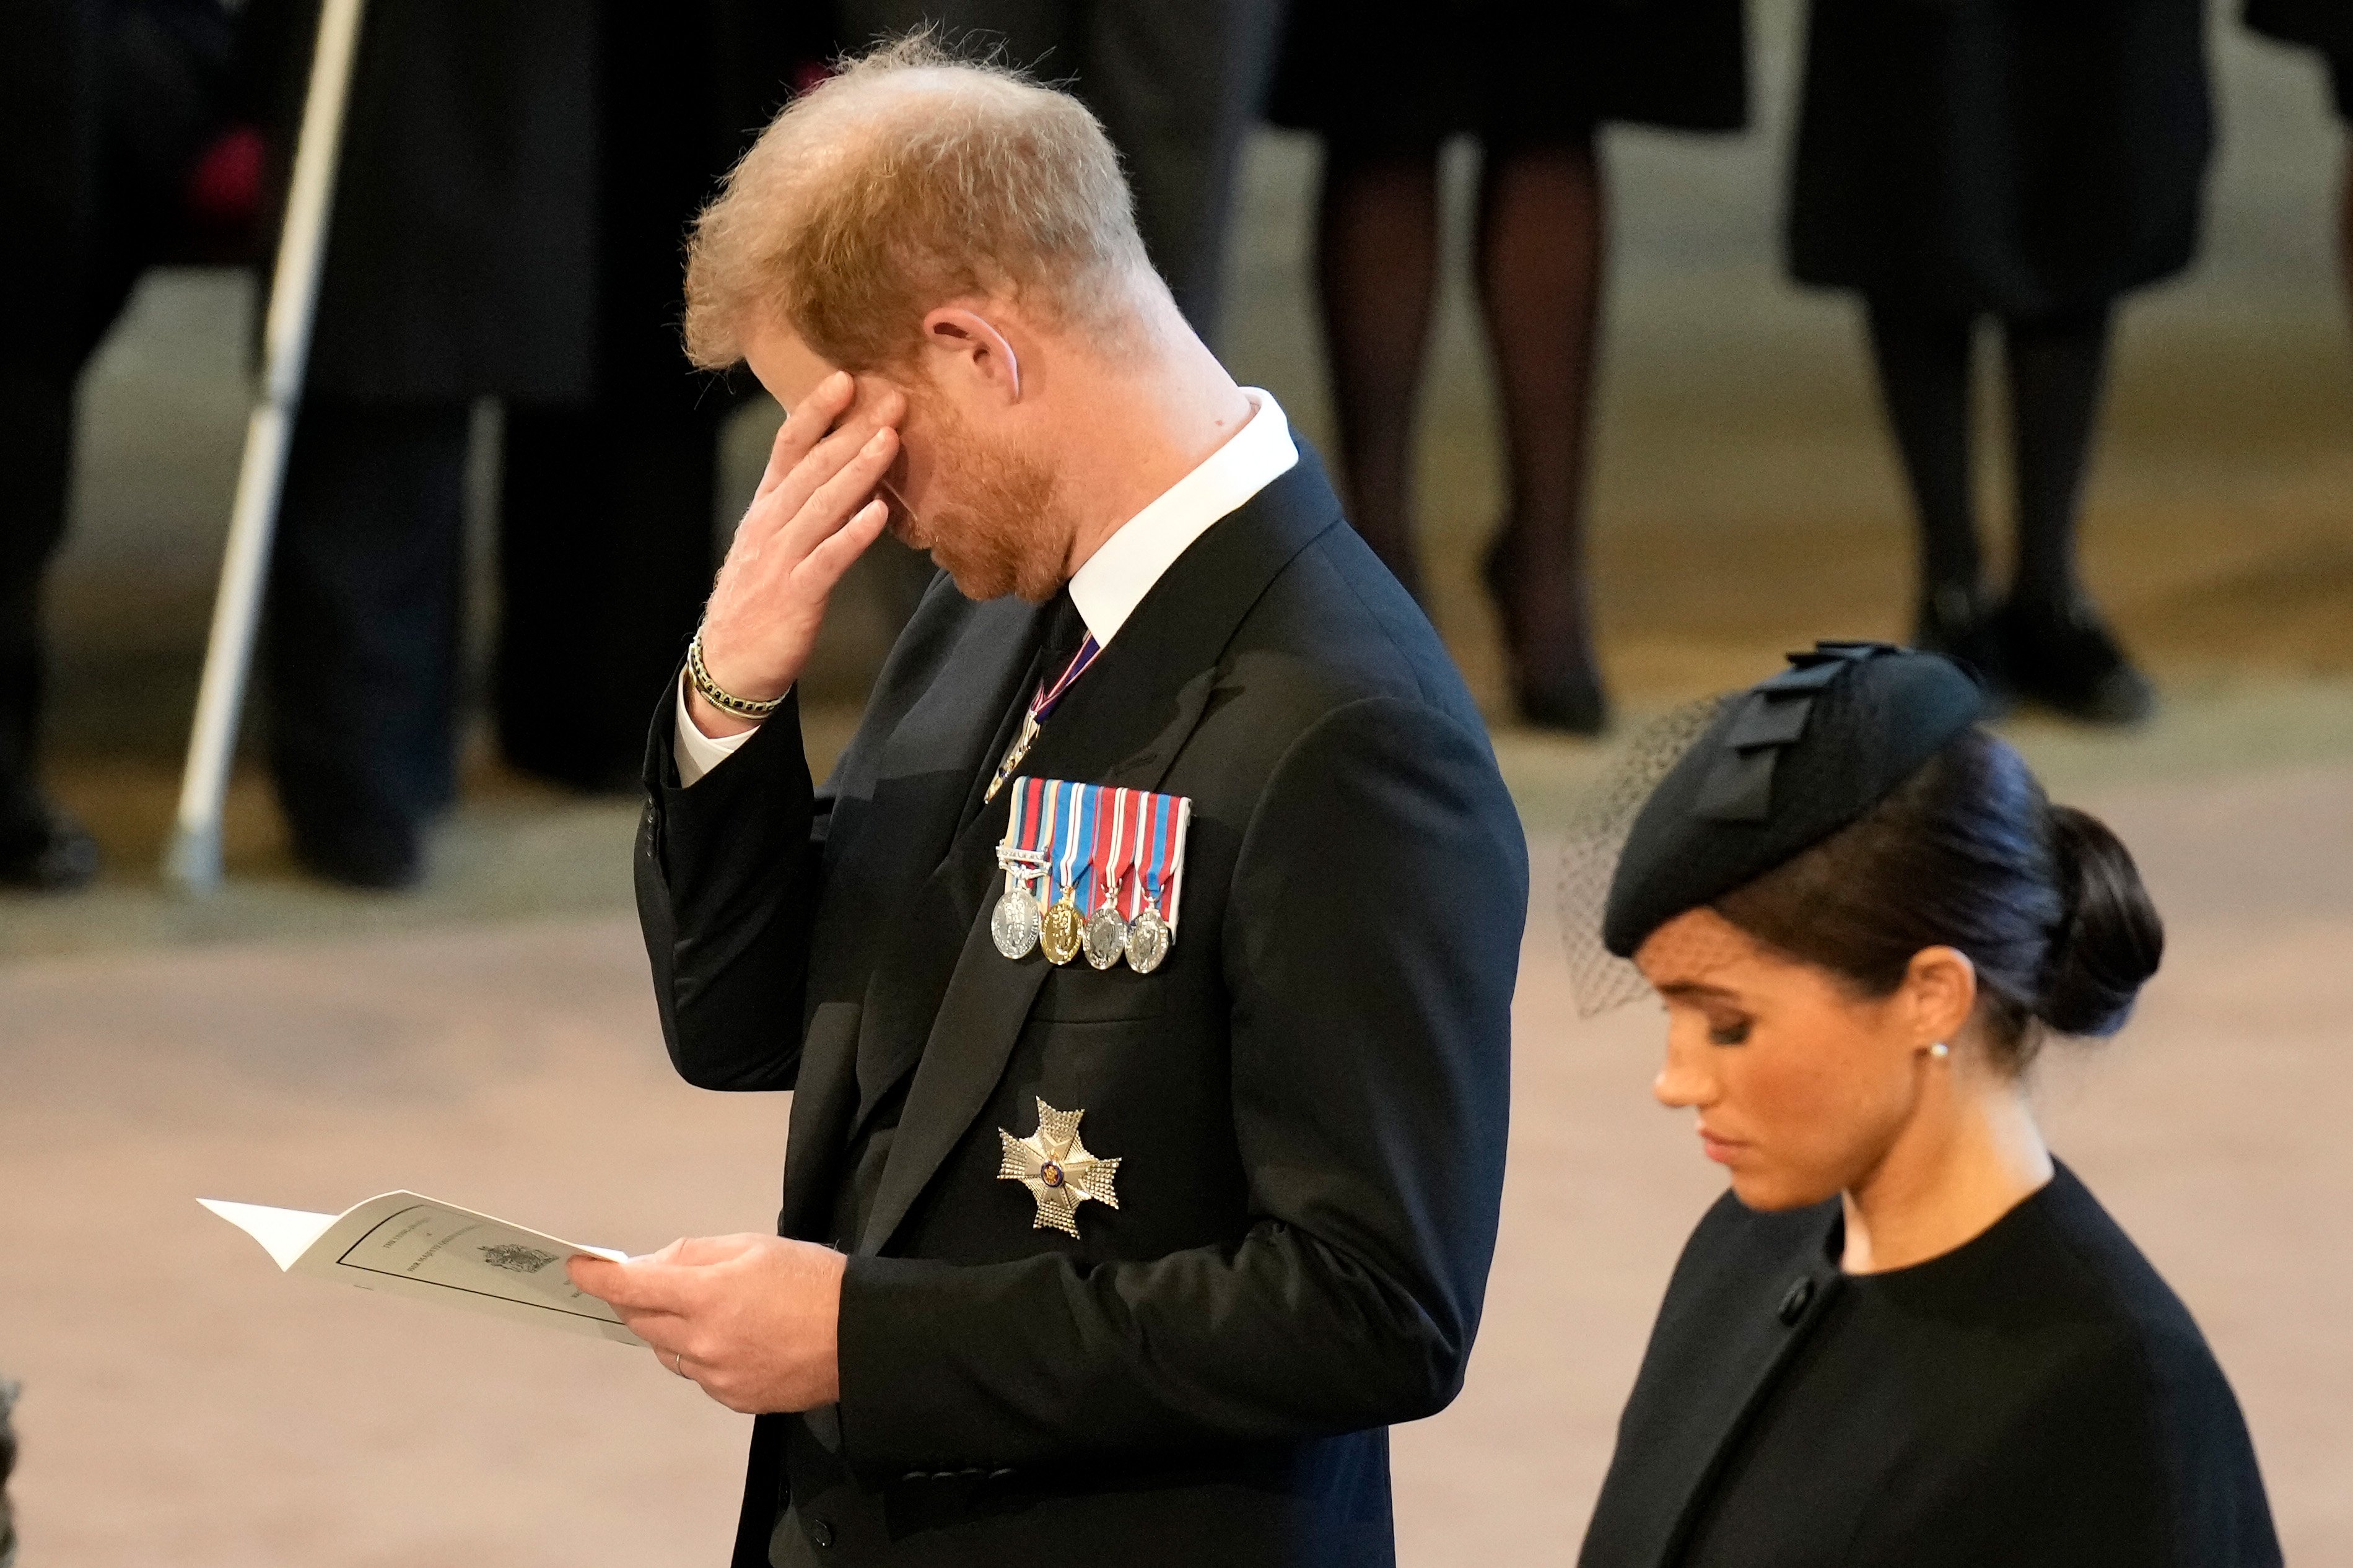 An emotional Prince Harry, Duke of Sussex and Meghan, Duchess of Sussex pay their respects in The Palace of Westminster after the procession for the Lying-in State of Queen Elizabeth II on September 14, 2022 in London, England | Source: Getty Images 